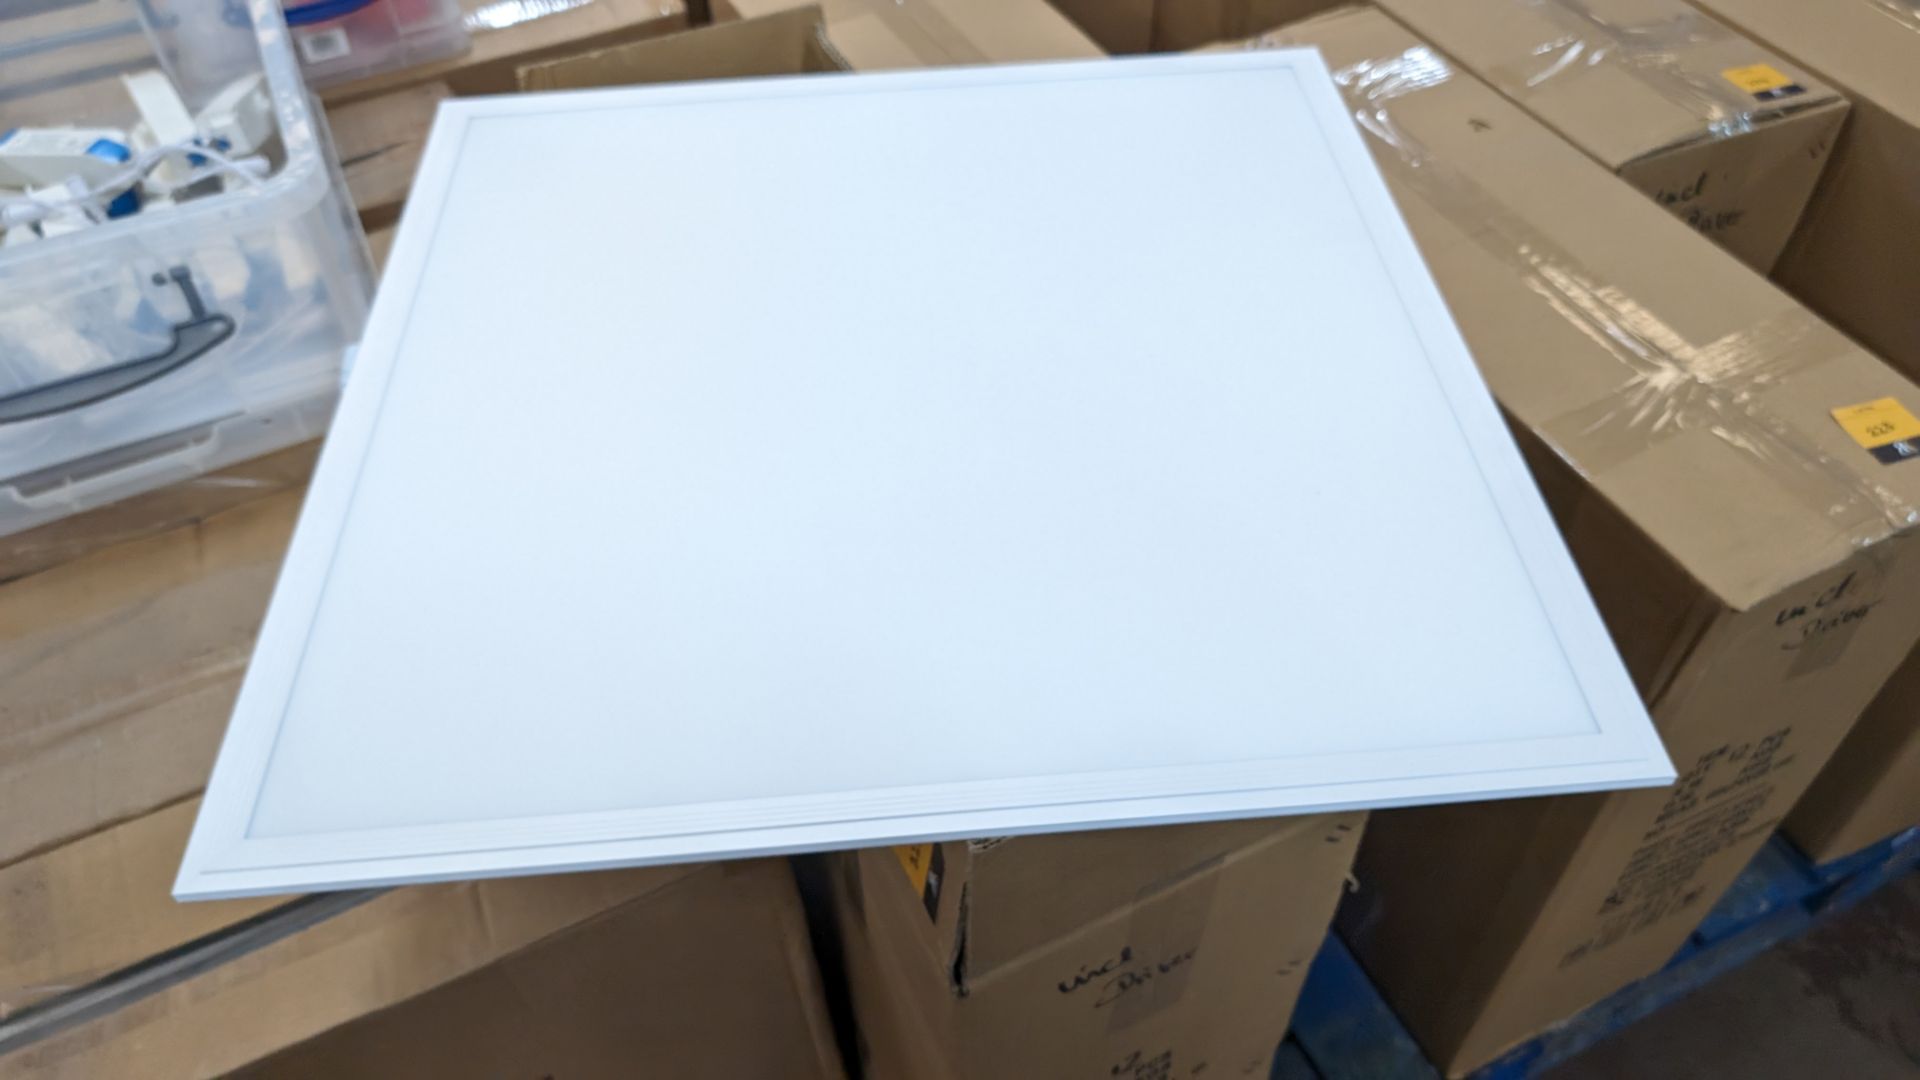 12 off 595mm x 595mm 5500k 45w LED lighting panels, each including driver - 1 carton - Image 3 of 6